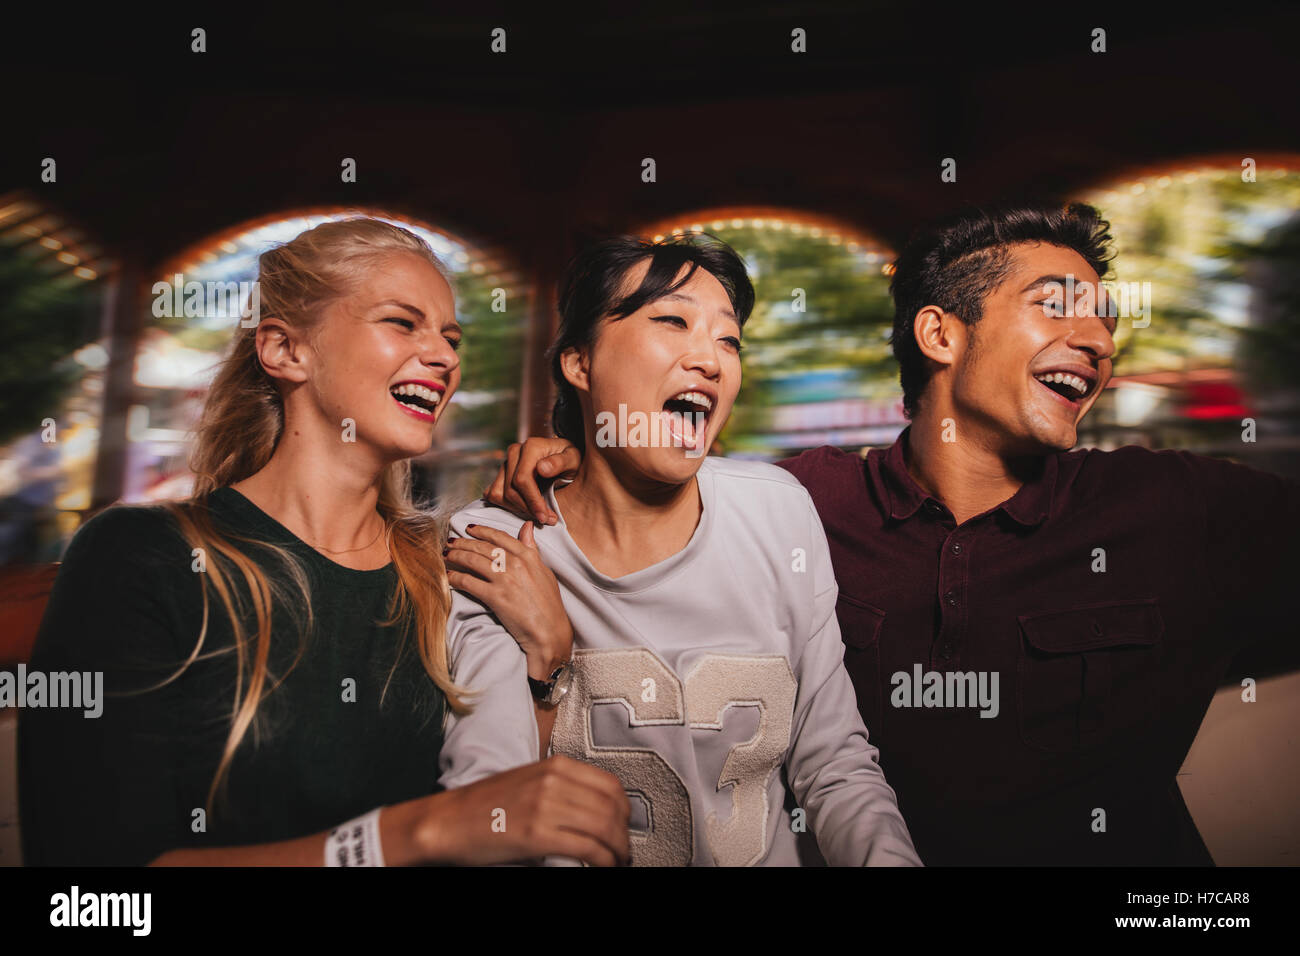 Group of friends on amusement park ride. Young man and women having fun together. Stock Photo